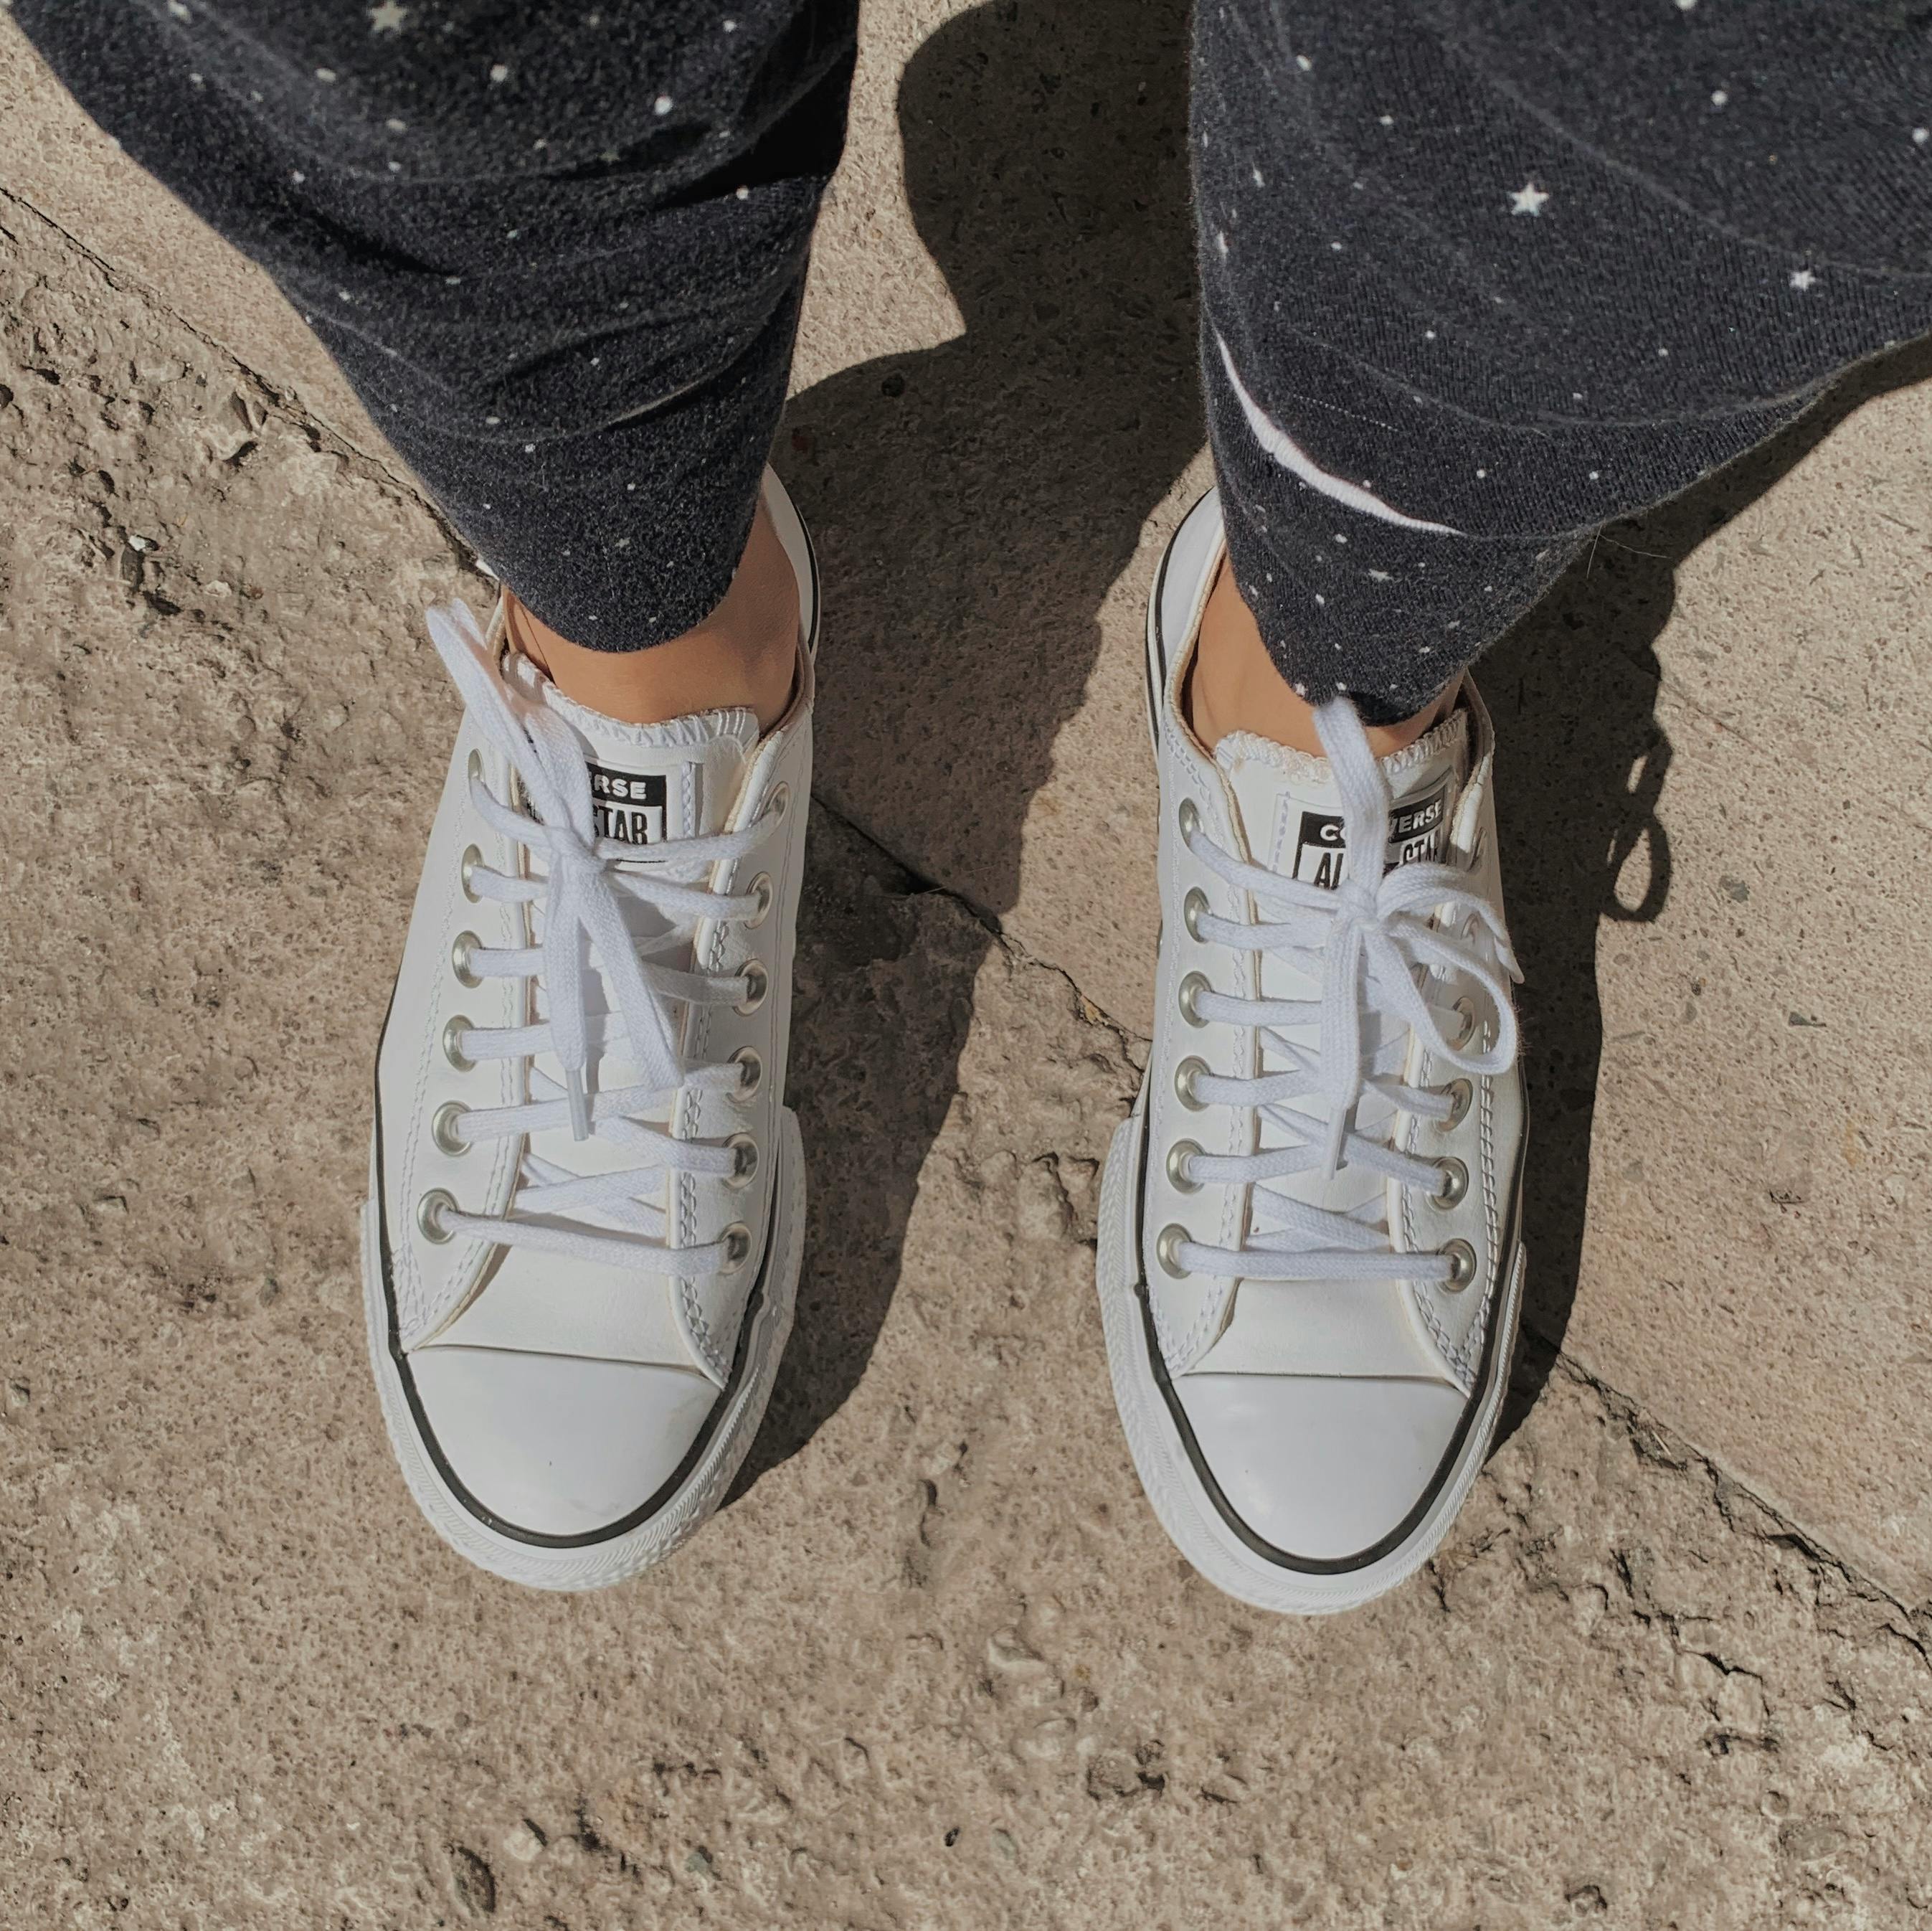 A Person in Black Jeans Wearing White Converse Shoes · Free Stock Photo